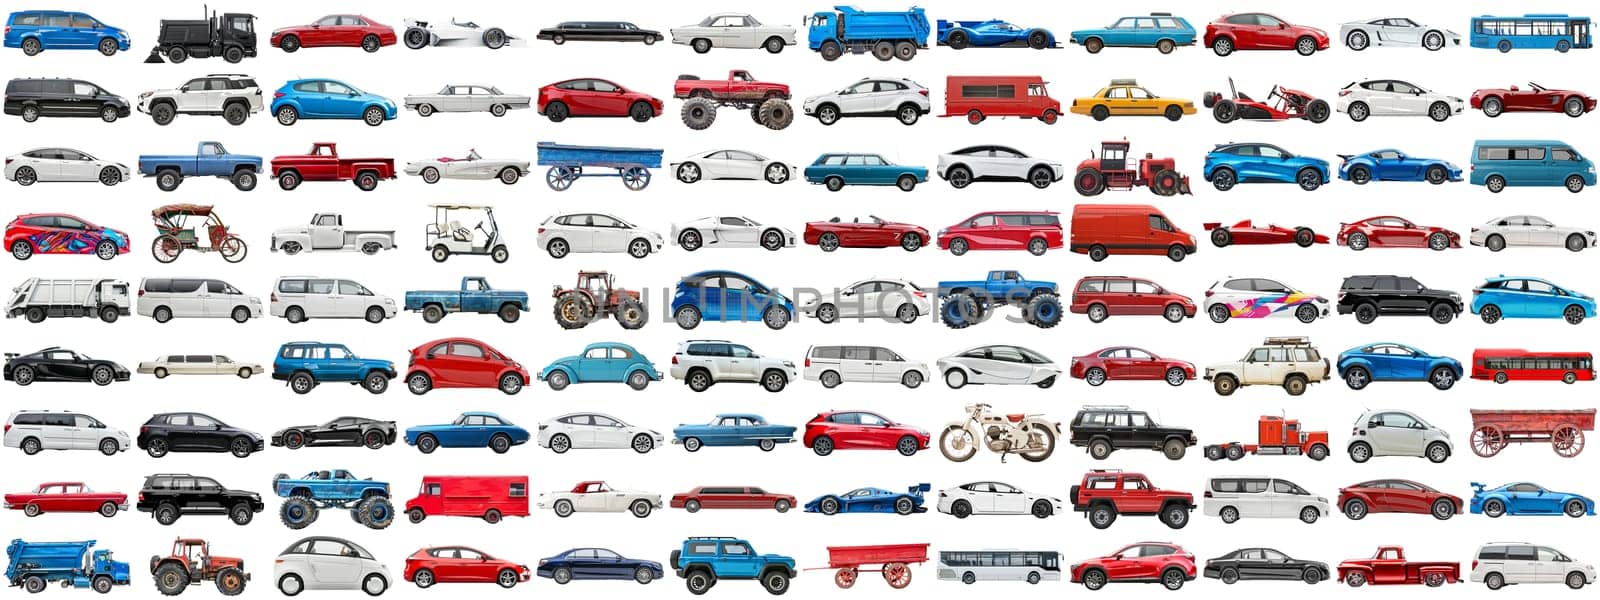 108 cars and various vehicles set of sedan, sports car, super car, bus, electric car, race car and other motor vehicles, many car photo collection set on isolated background AIG44